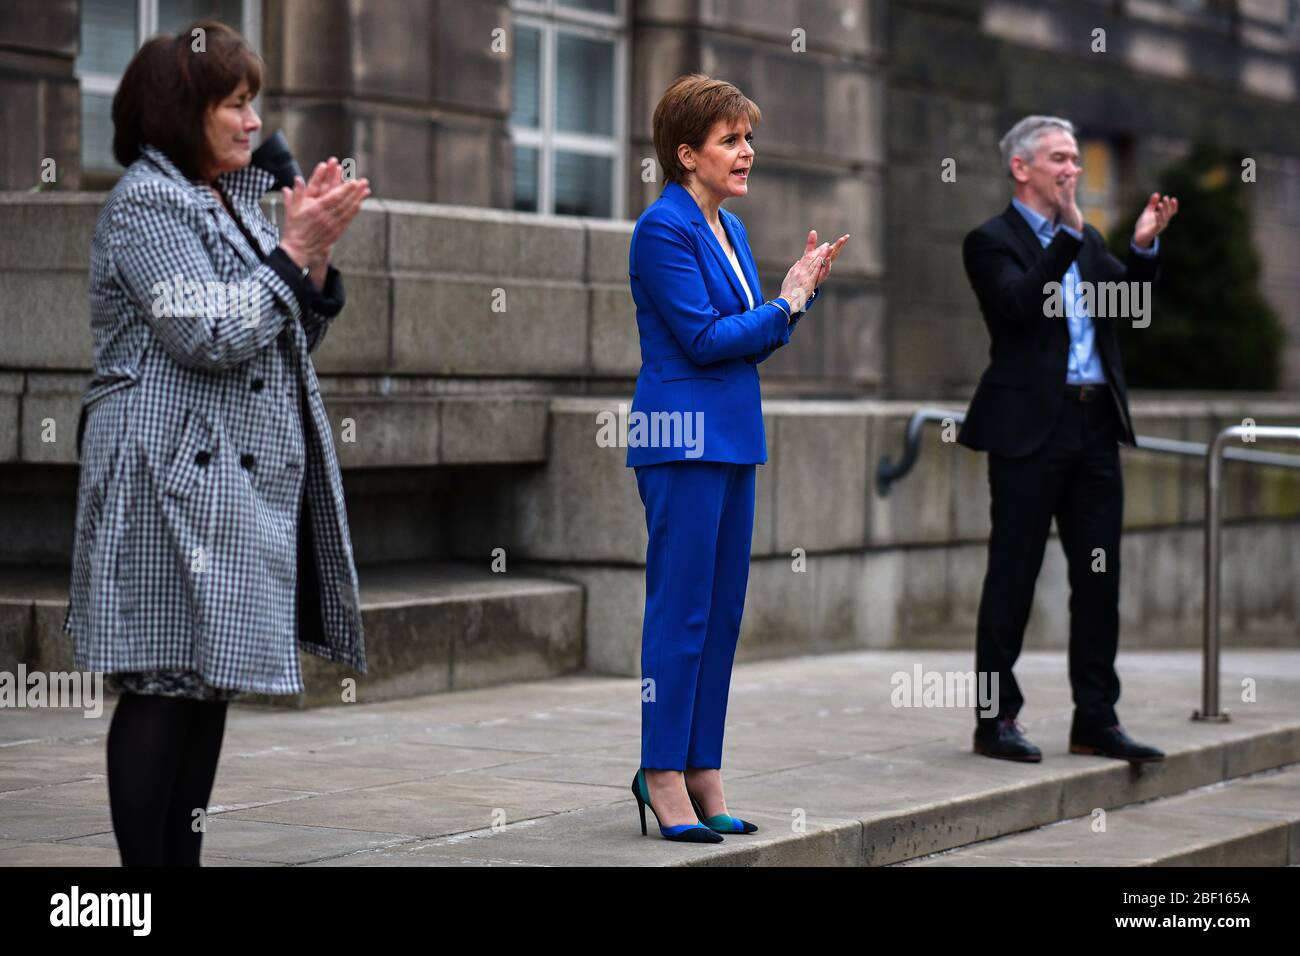 (left to right) Health Secretary Jeane Freeman, First Minister Nicola Sturgeon and Dr Gregor Smith Scotland's interim chief medical officer applaud outside St Andrew's House, the headquarters building of the Scottish Government in Edinburgh, to salute local heroes during Thursday's nationwide Clap for Carers initiative to recognise and support NHS workers and carers fighting the coronavirus pandemic. Stock Photo